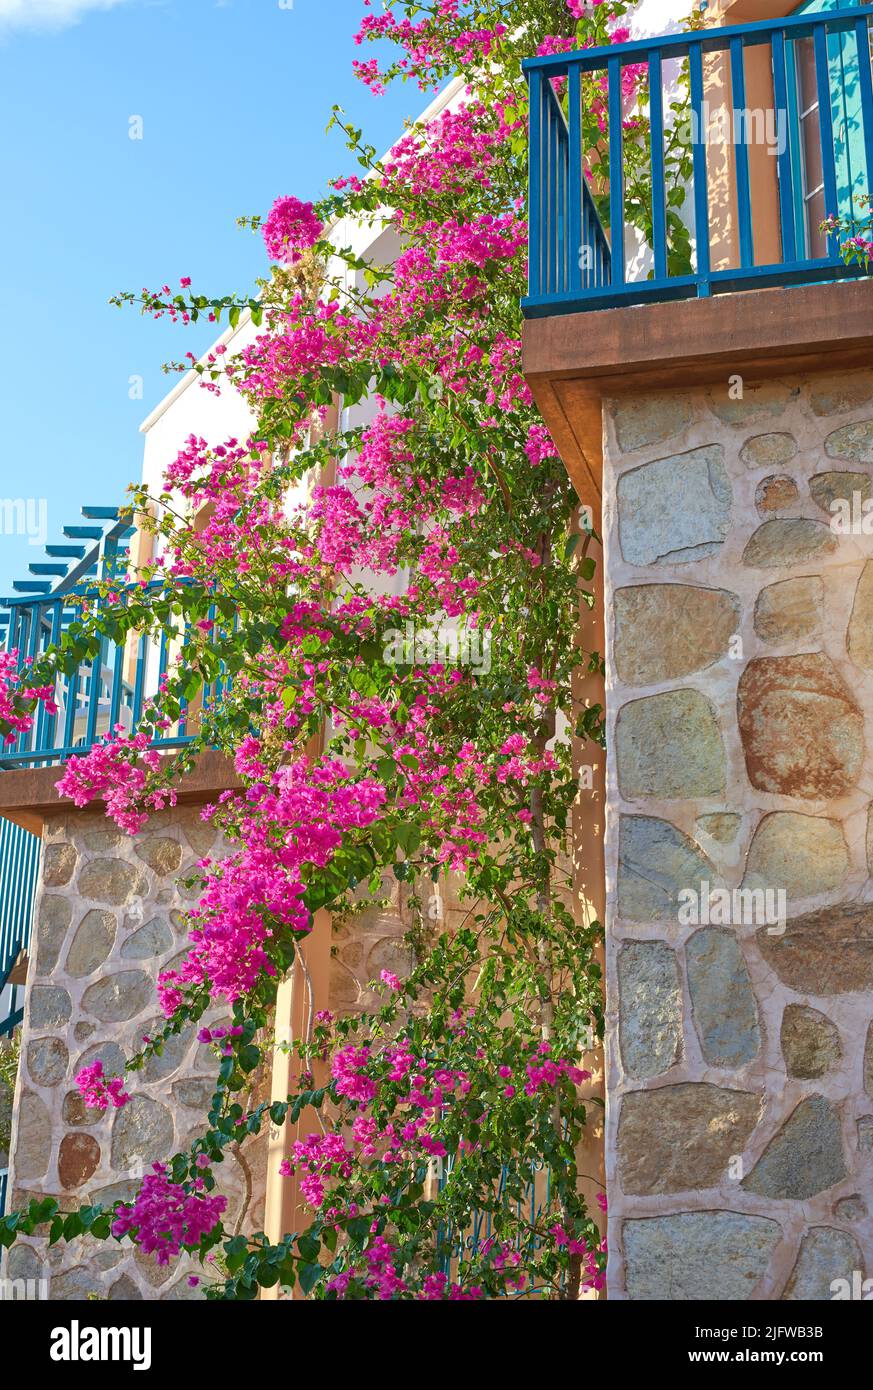 Pink bougainvillea flower hanging on a stoned textured wall of a house surrounded by a blue railing and a clear sky in the background. Blossoming pink Stock Photo